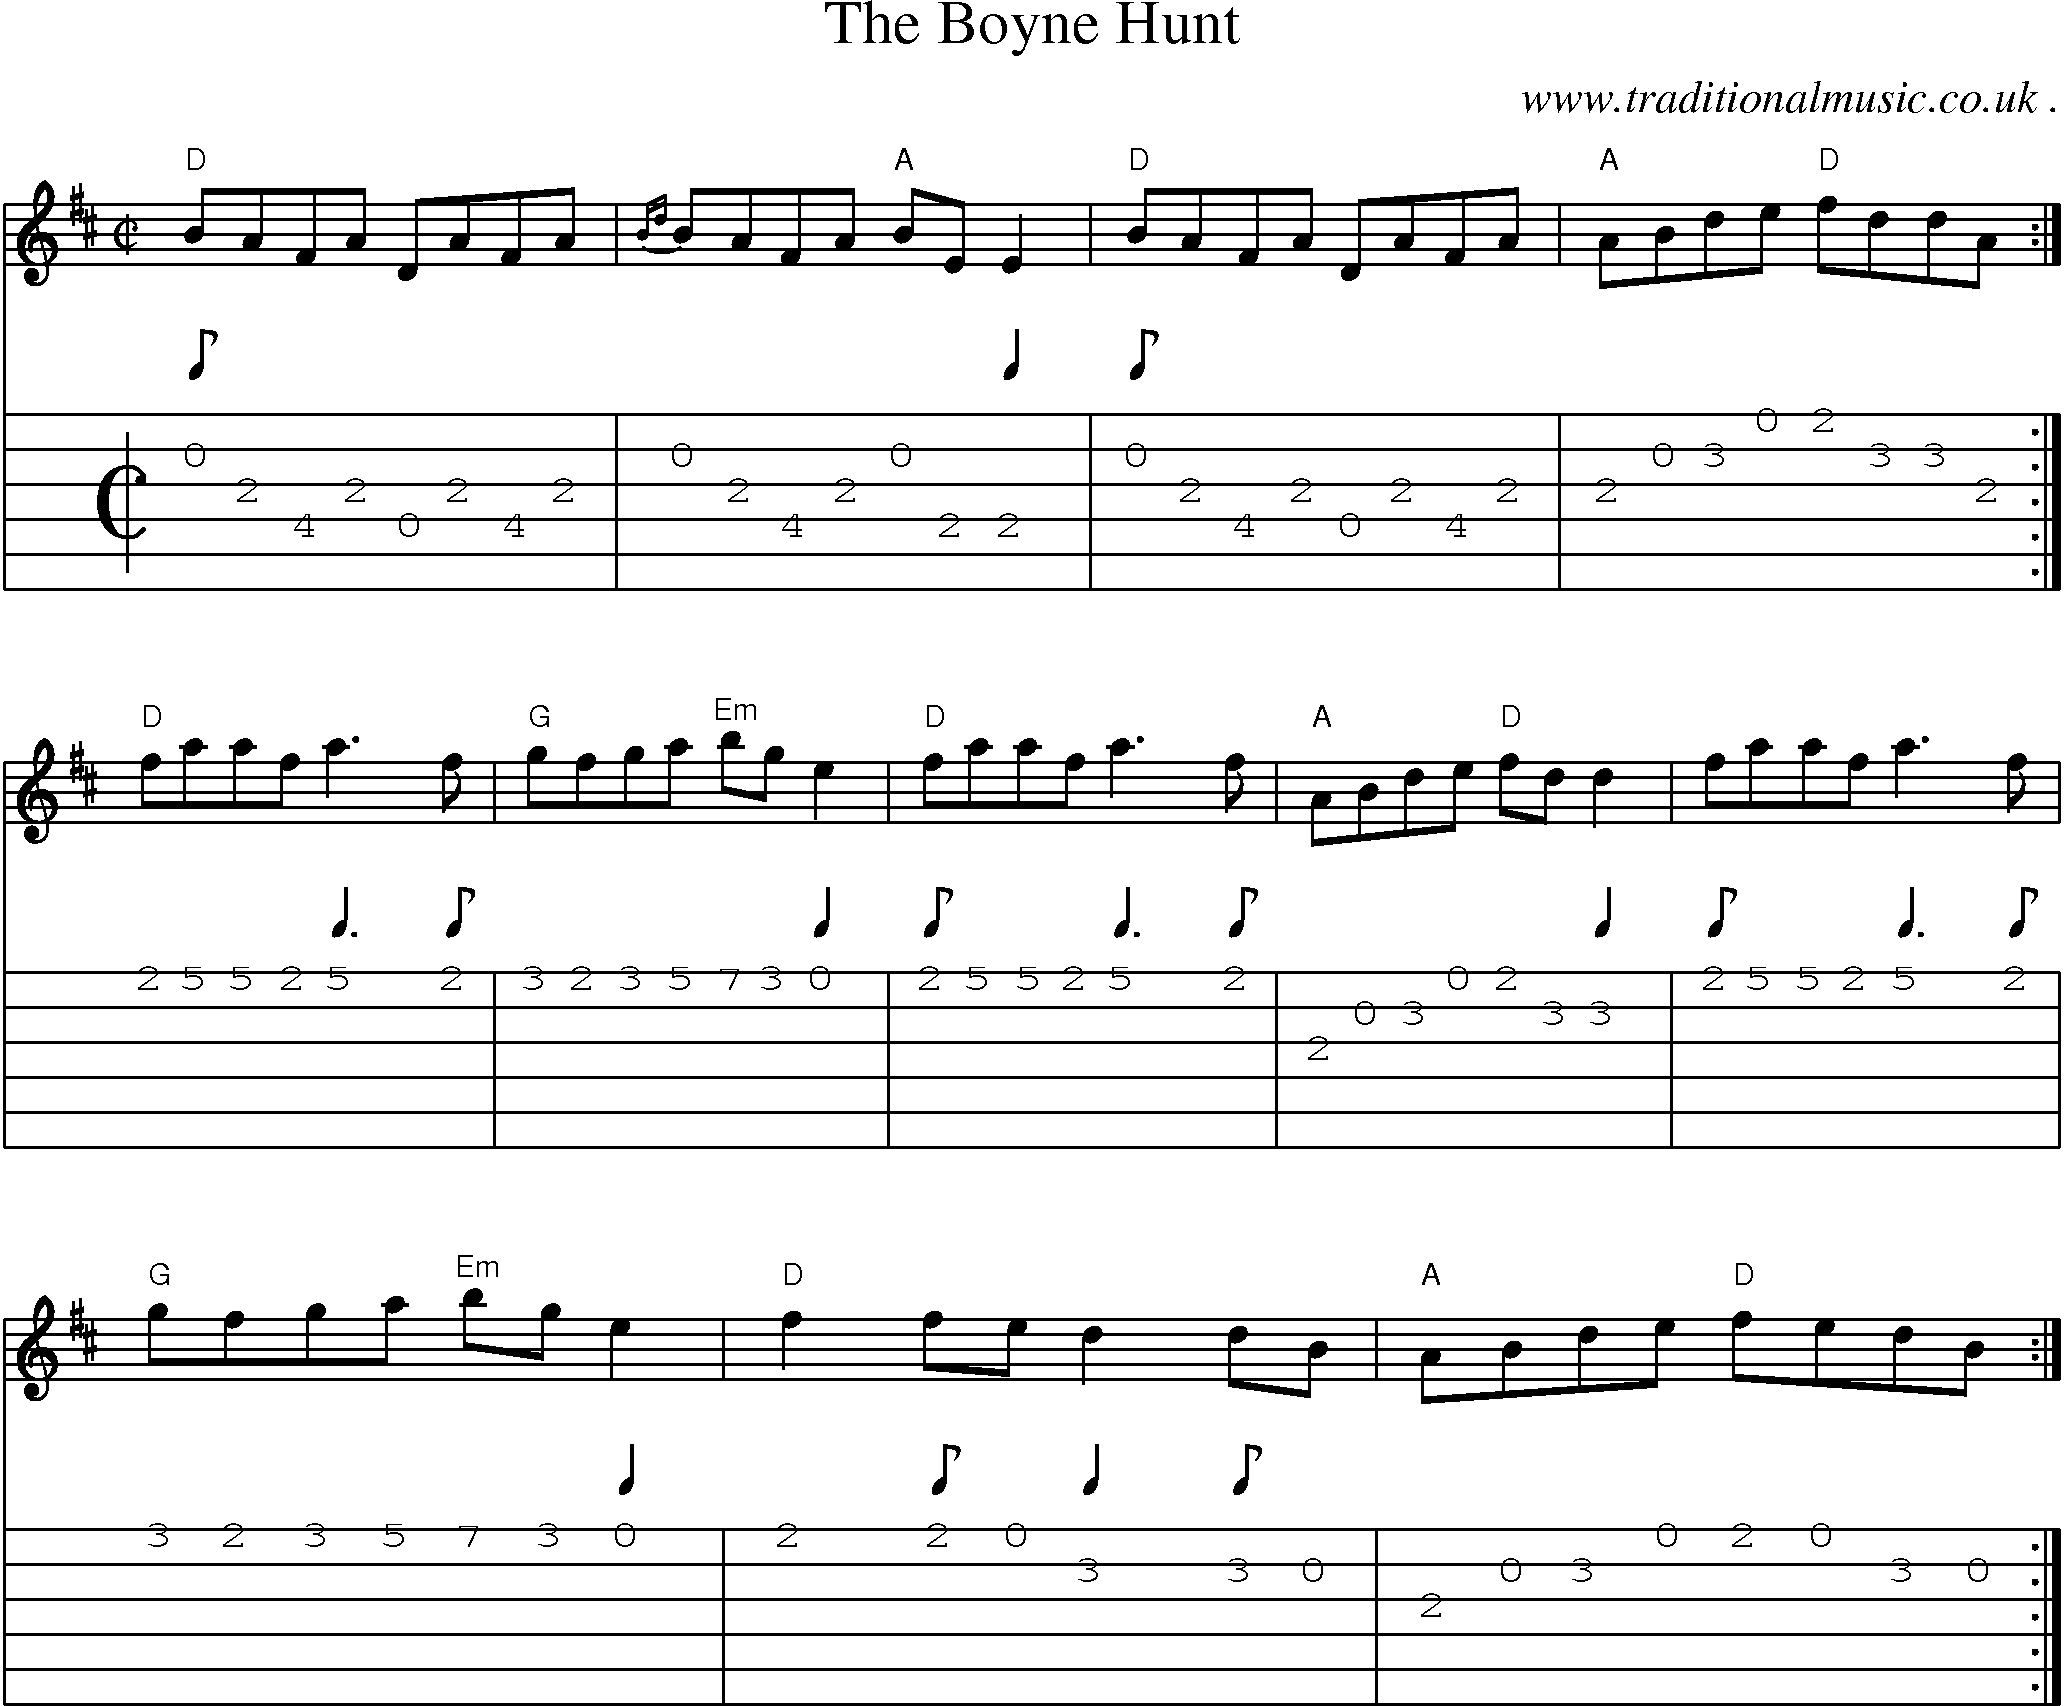 Music Score and Guitar Tabs for The Boyne Hunt